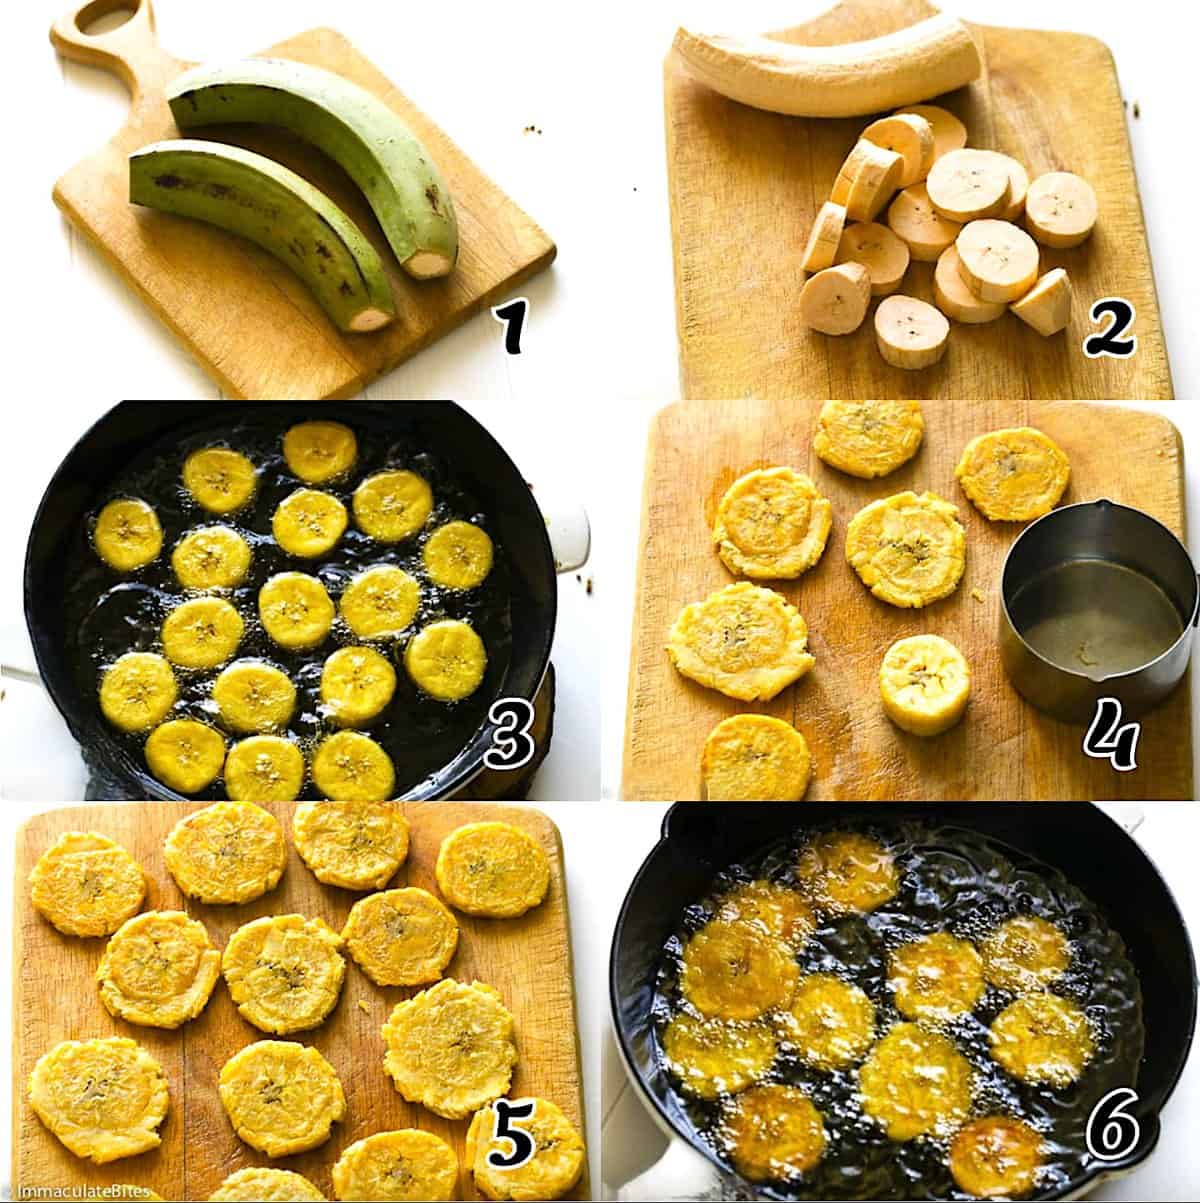 Peel and slice the plantains, fry, mash, and fry some more